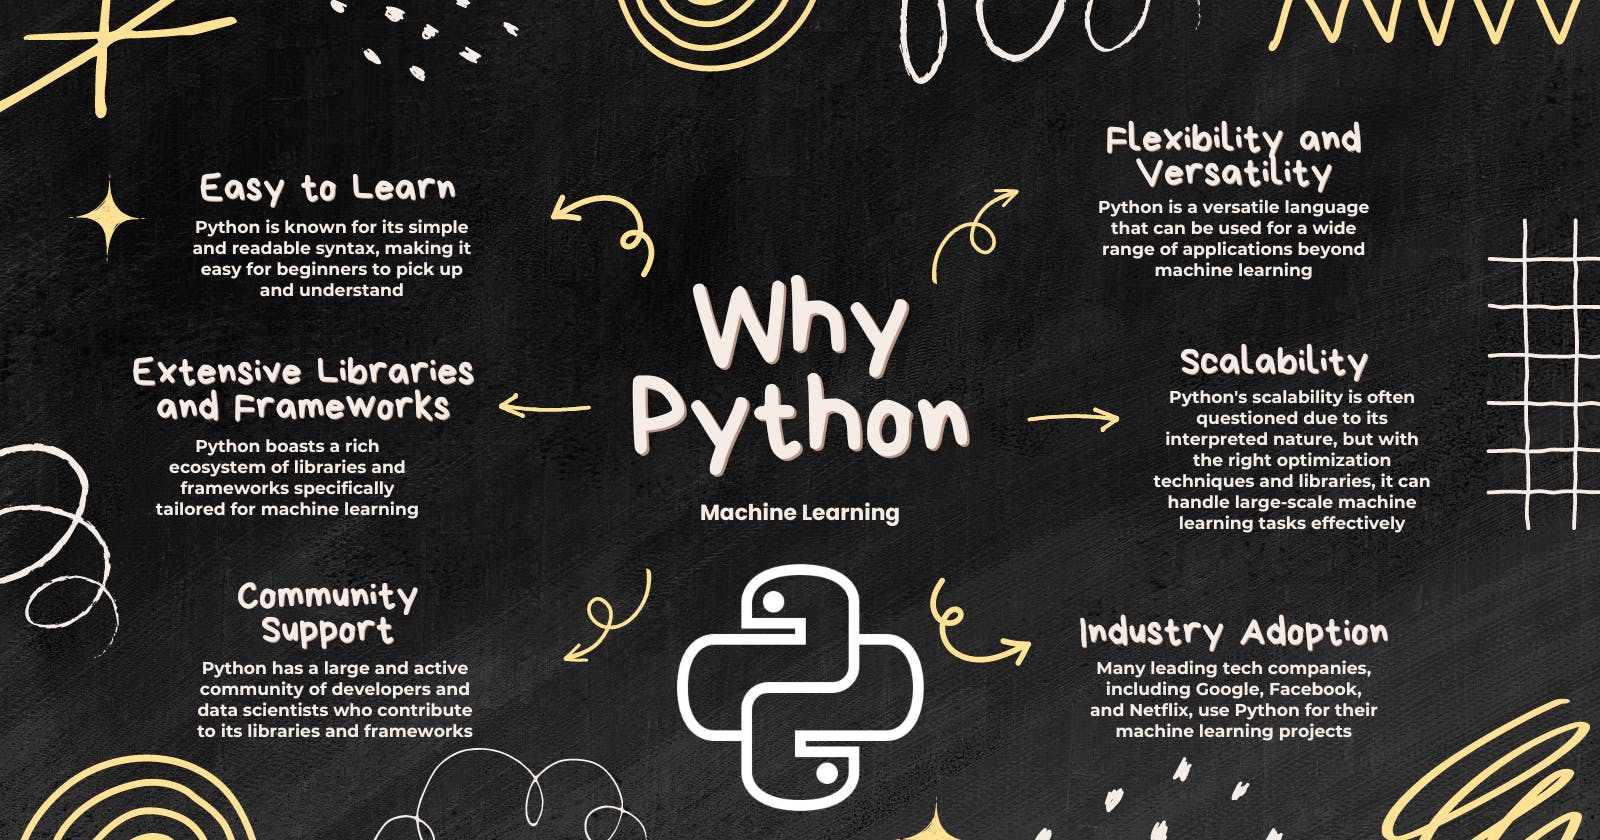 Why Python for Machine Learning